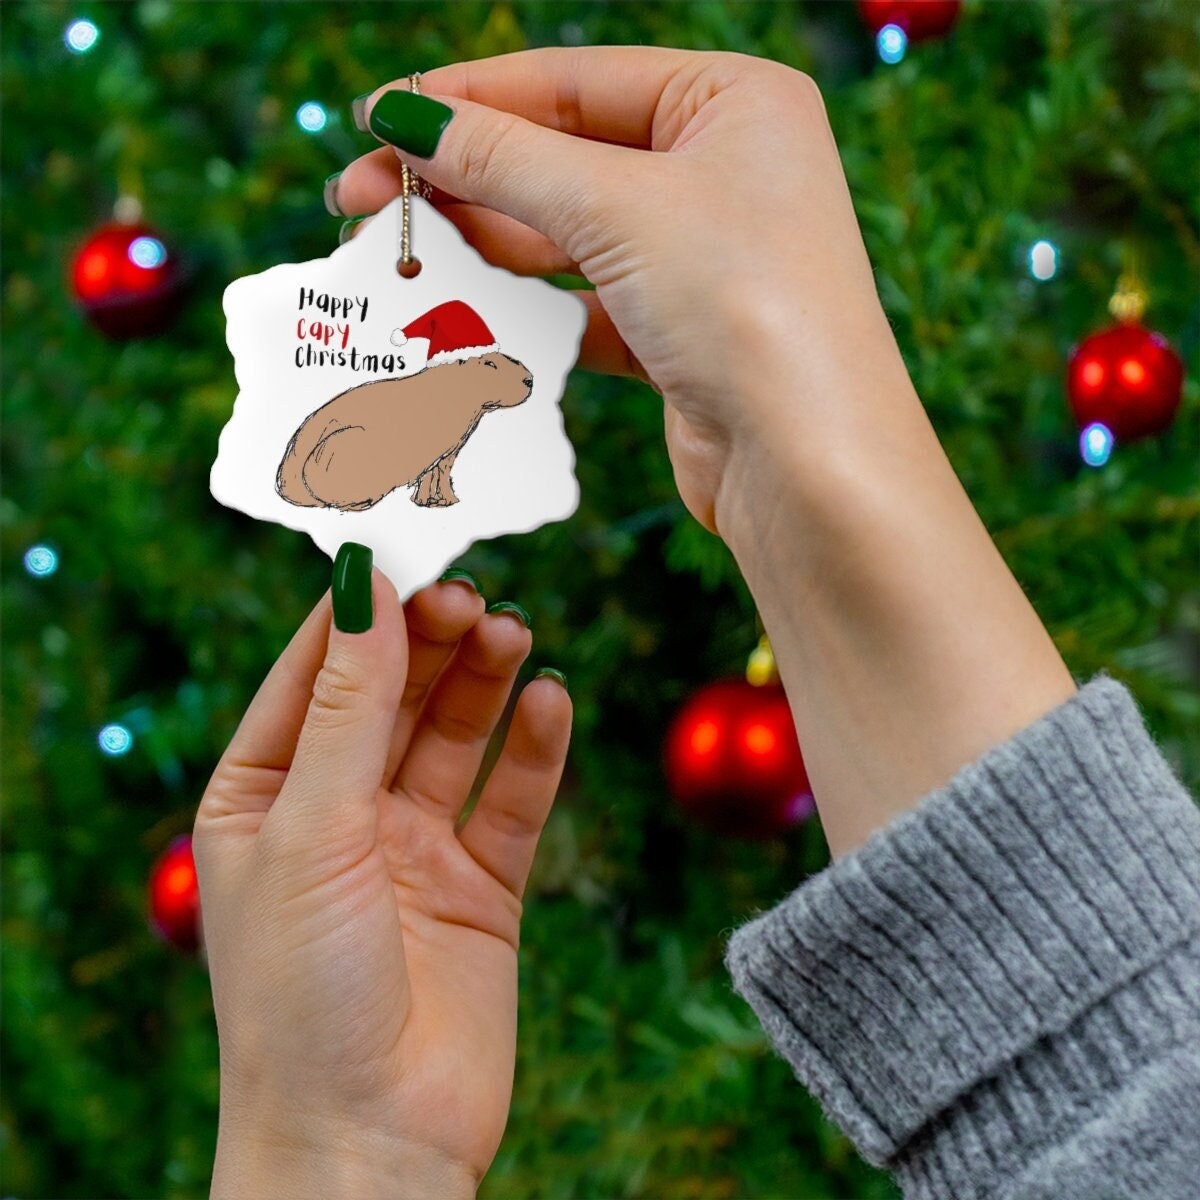 Capybara Christmas Ornament, Hand Illustrated Cute Chill Rodent